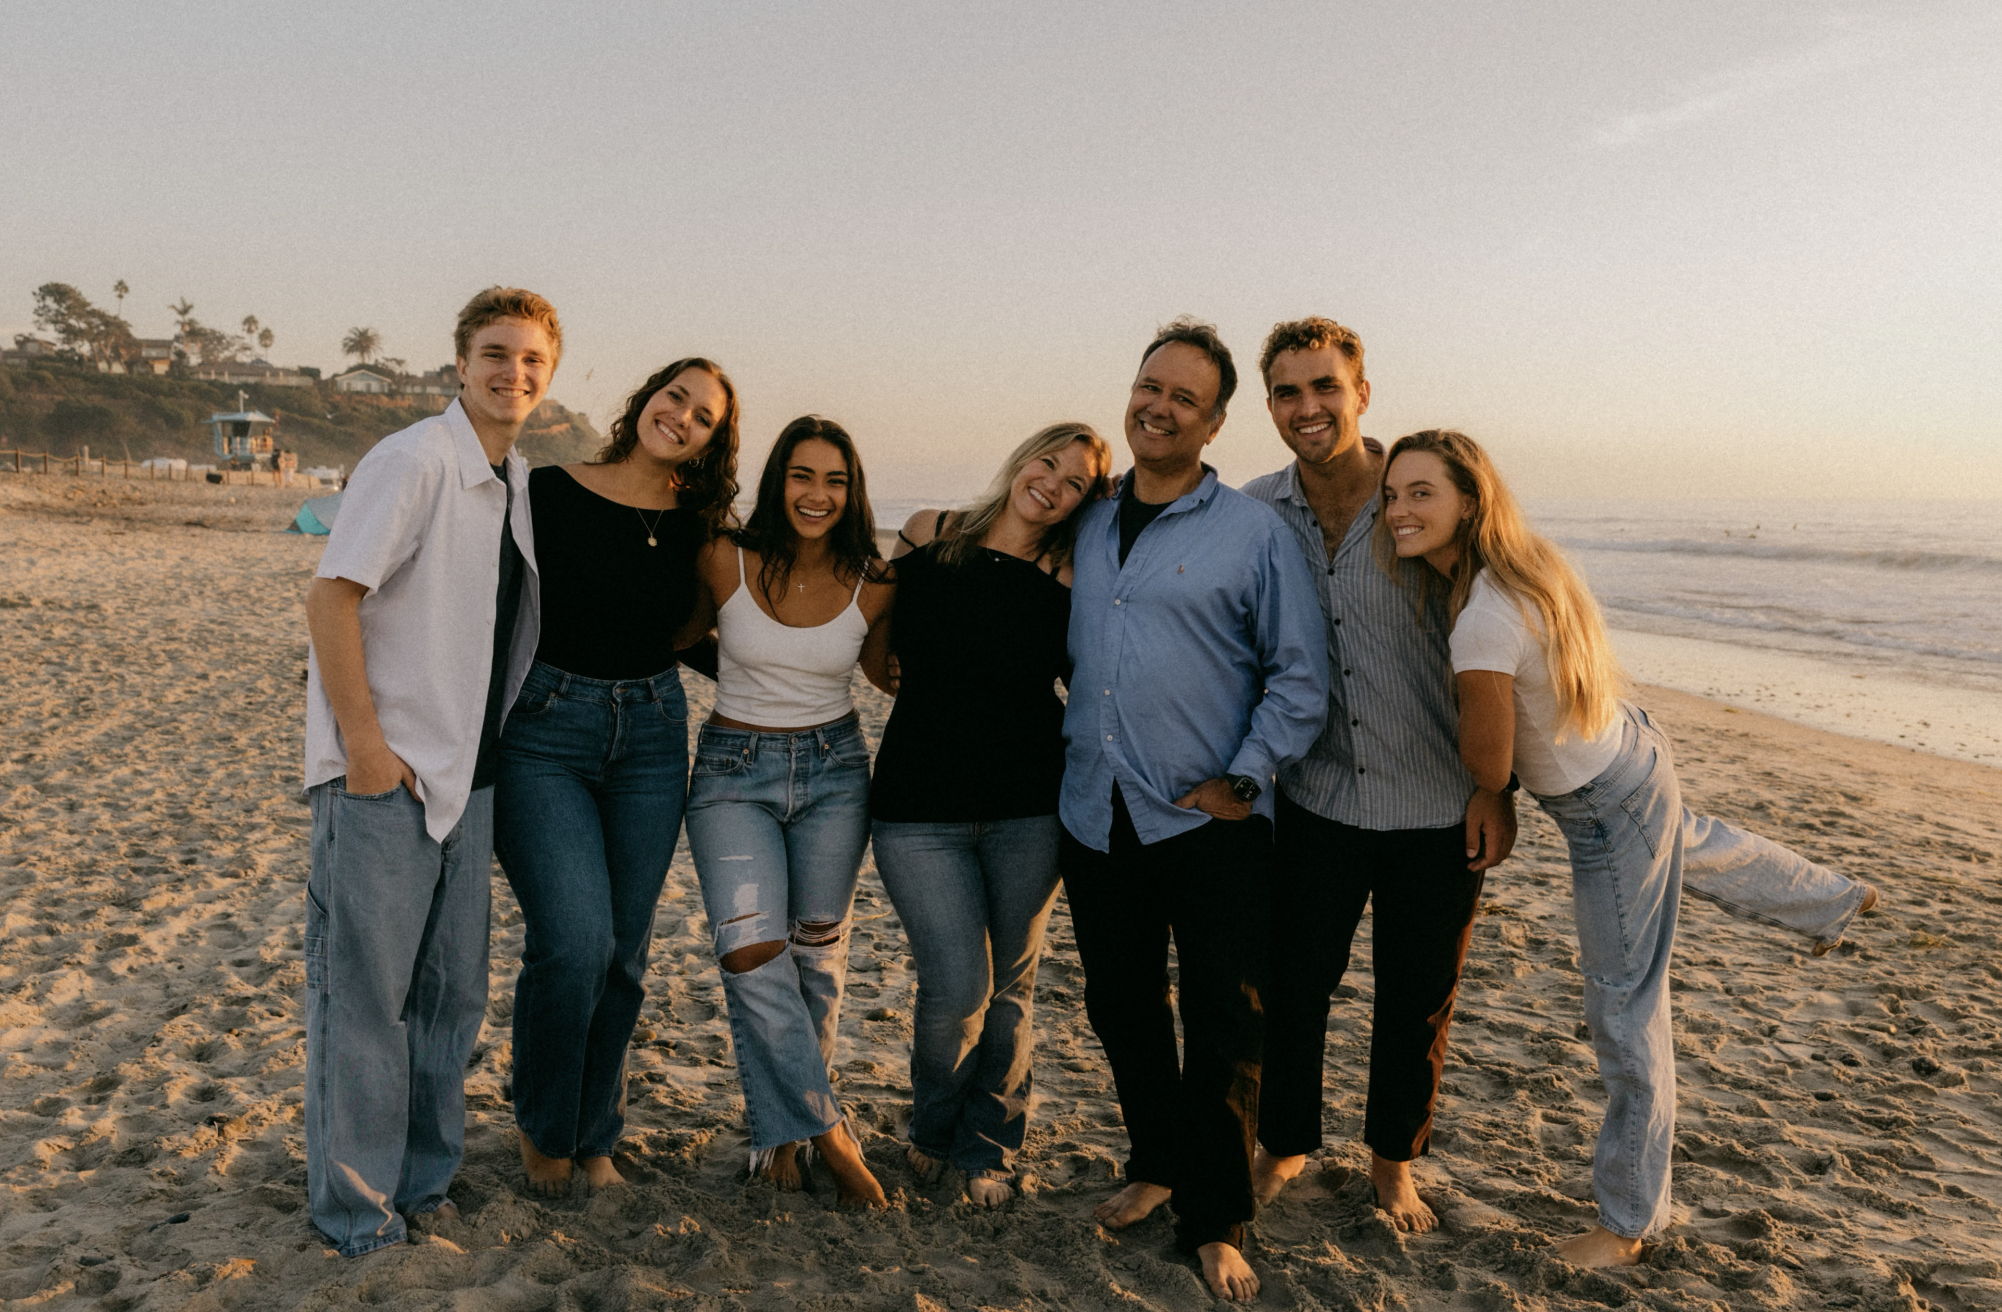 family photo of 7 standing on the beach in denim & white & denim and black